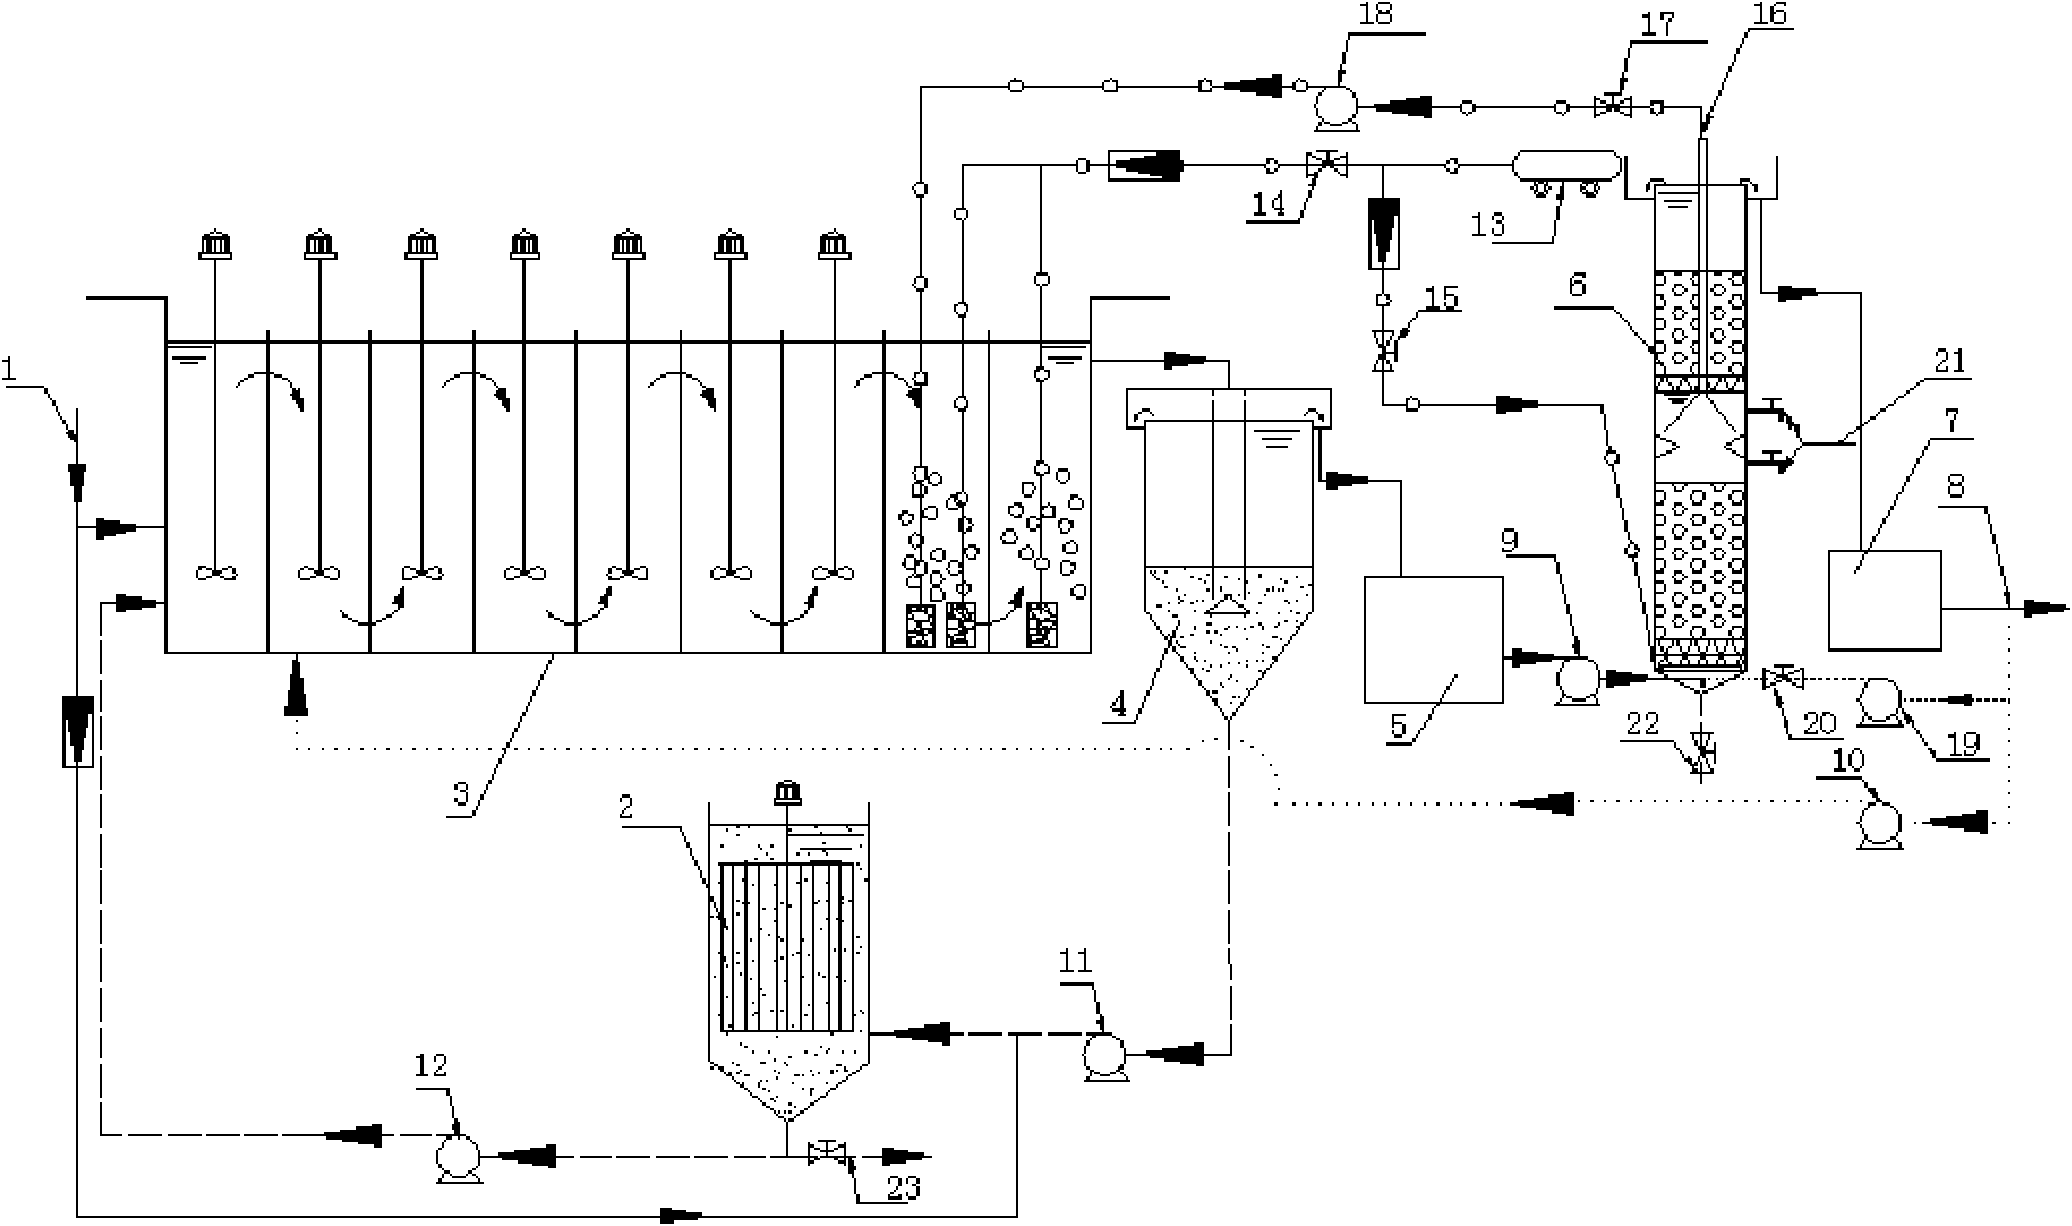 Sewage treatment device and method for enhanced denitrification A/A/O (Anodic Aluminum Oxide) and deoxygenation BAF (Biological Aerated Filter)